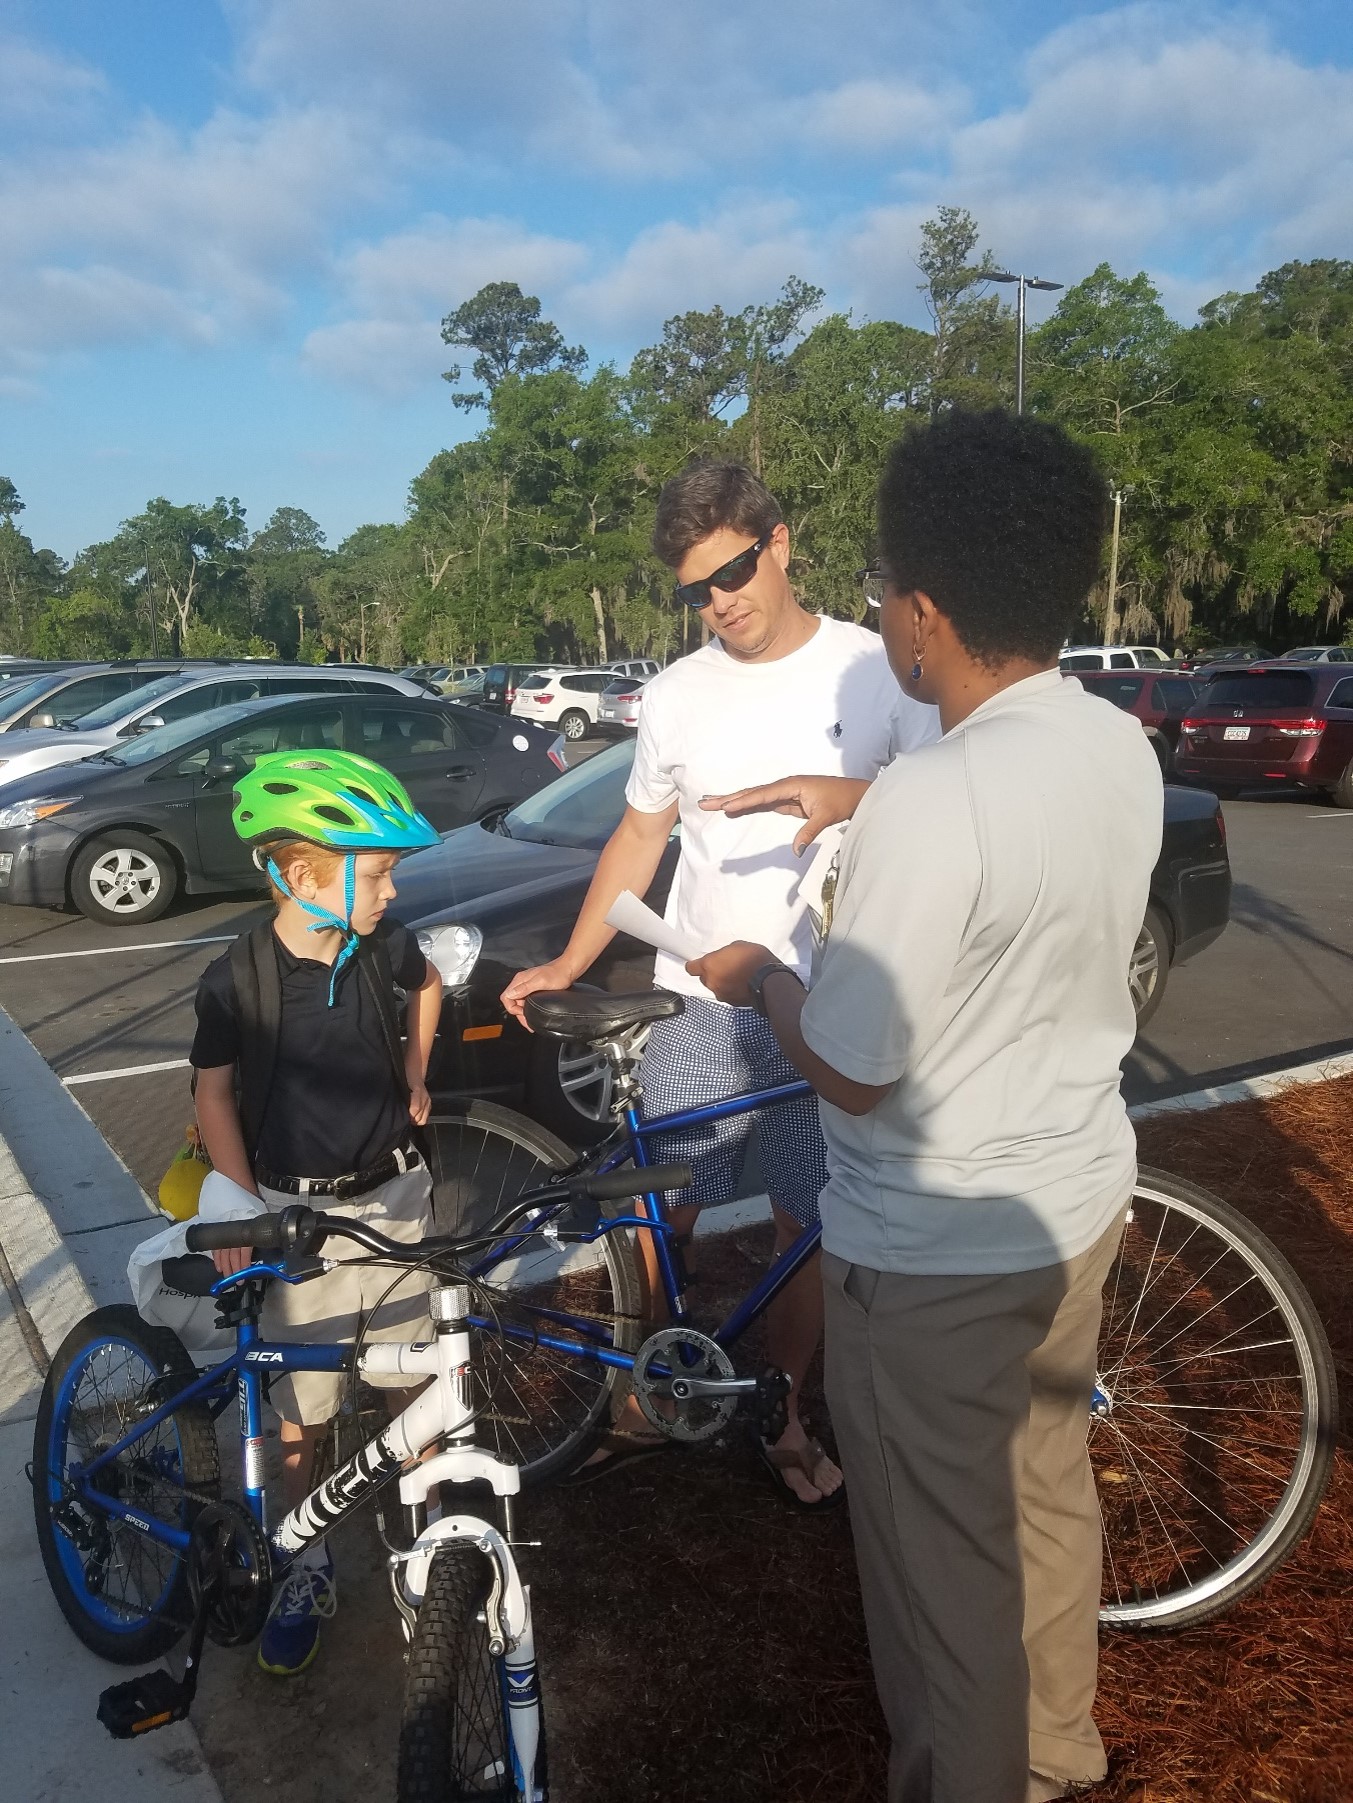 Parent and child learn about bicycle safety and receive materials from a SRTS volunteer while they stand beside bicycles.